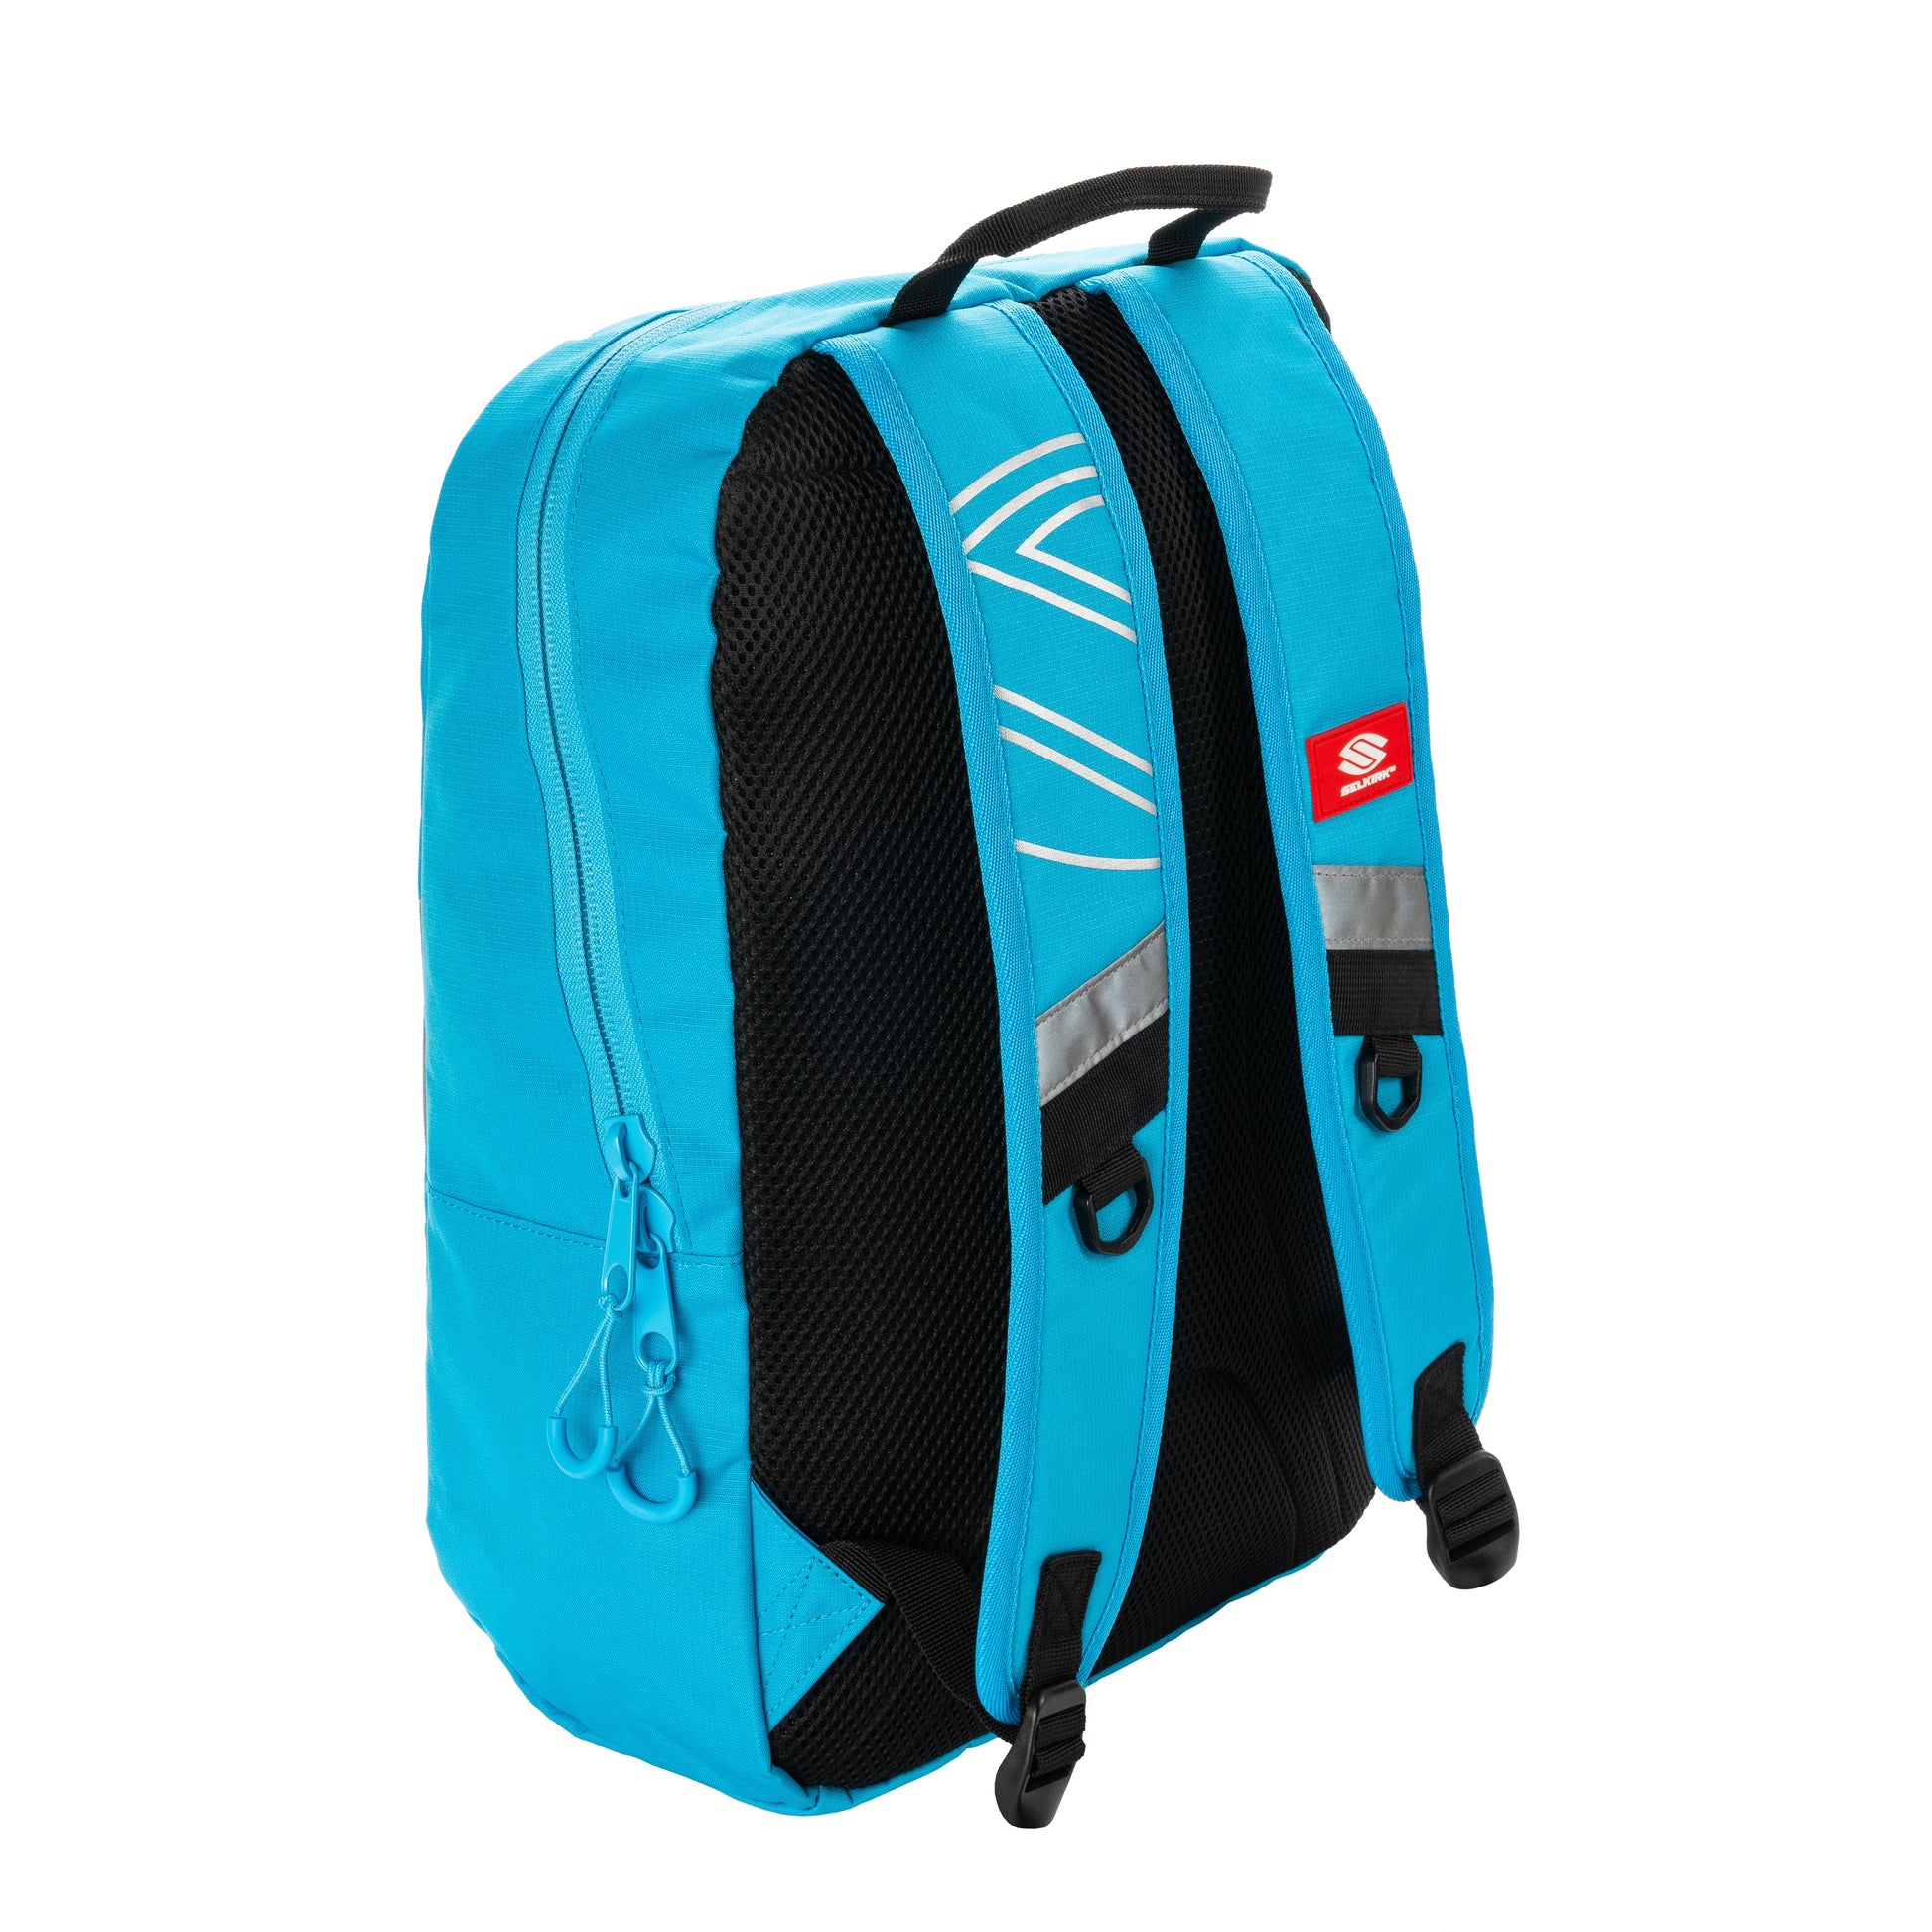 A Selkirk Core Series Day Backpack Pickleball Bag with black straps on it.